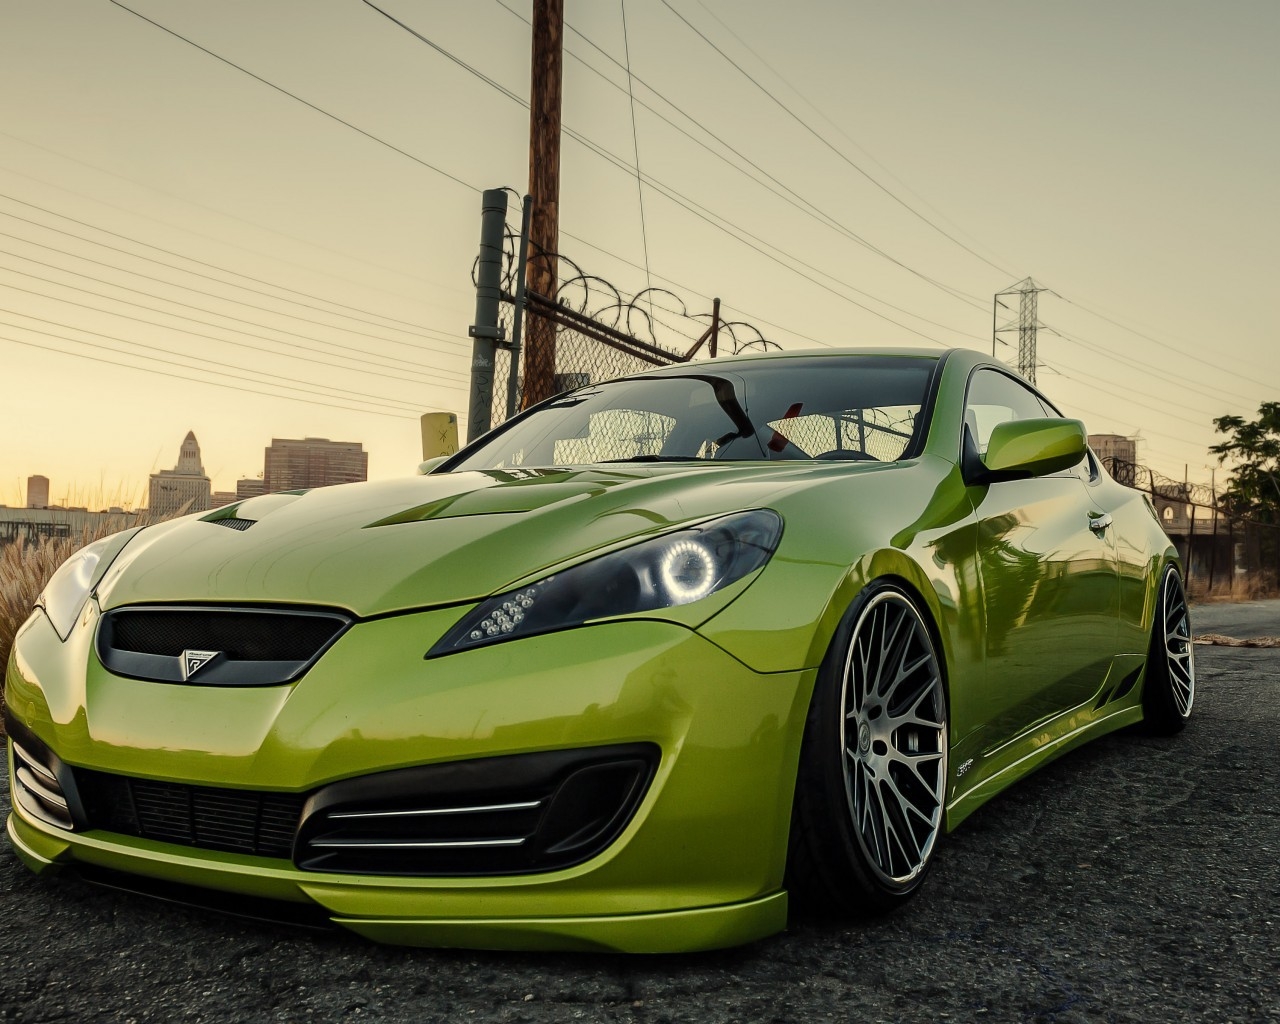 Stanced Hyundai Genesis Coupe for 1280 x 1024 resolution